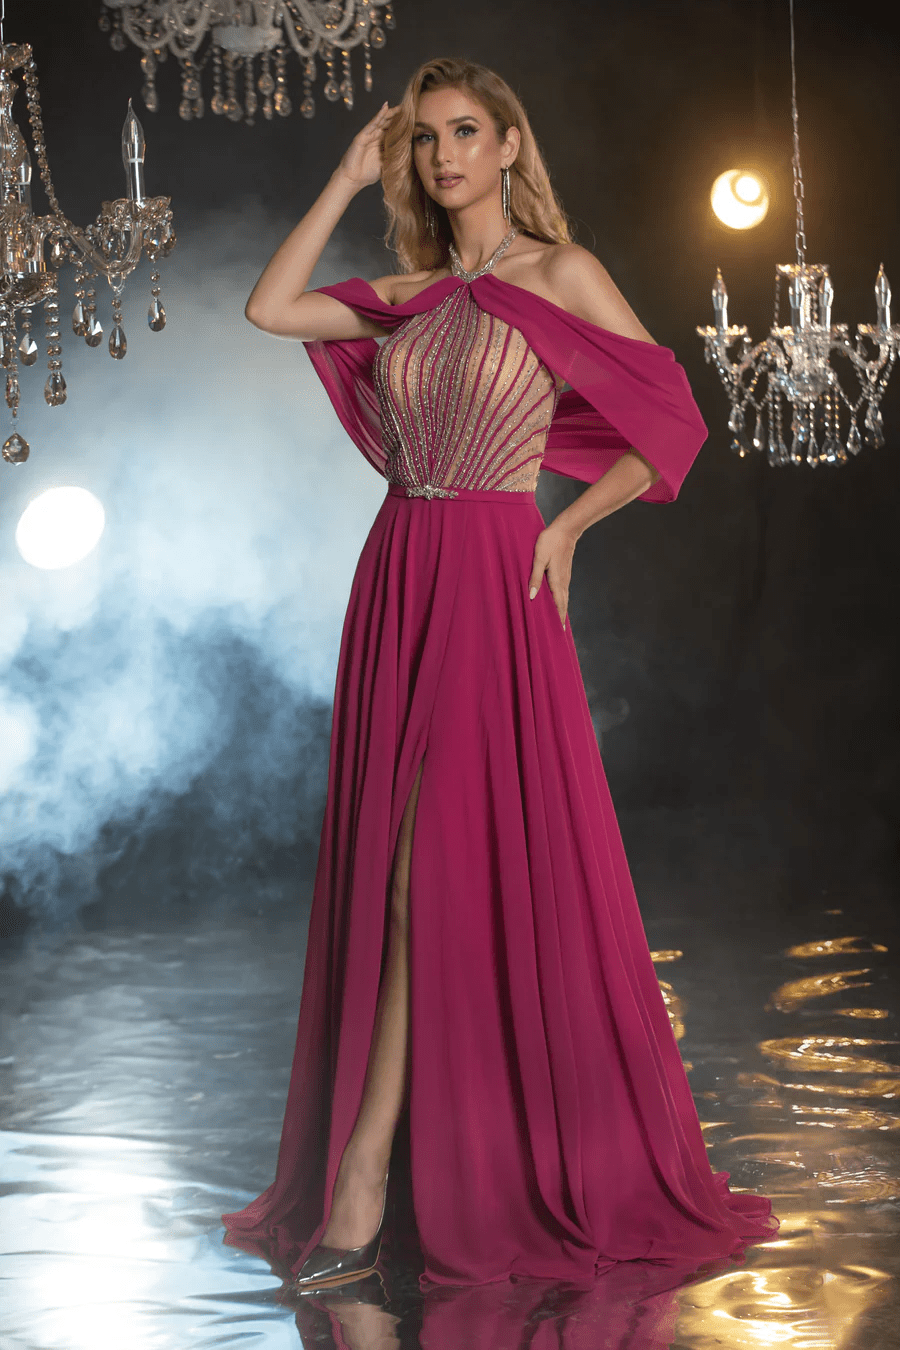 Gothic Fuchsia Sequin Evening Gown with Draped Cape and High Slit - Designer Sequin Gown and Glitter Dress Plus Size - WonderlandByLilian